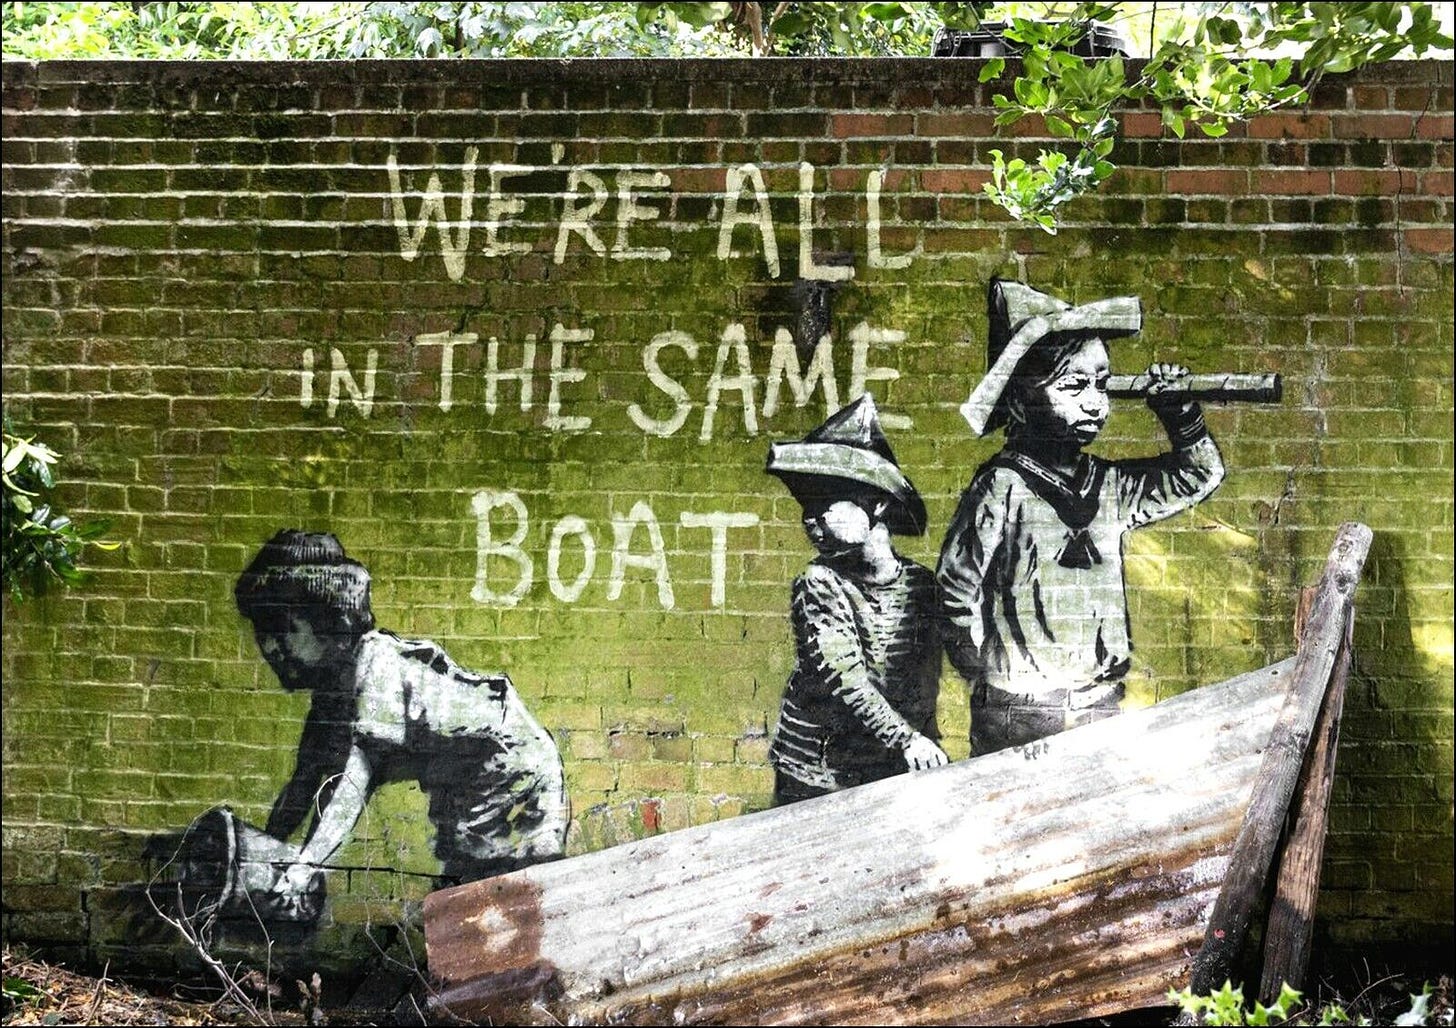 BANKSY, WE'RE ALL IN THE SAME BOAT -FRAMED WALL ART PICTURE PRINT | eBay